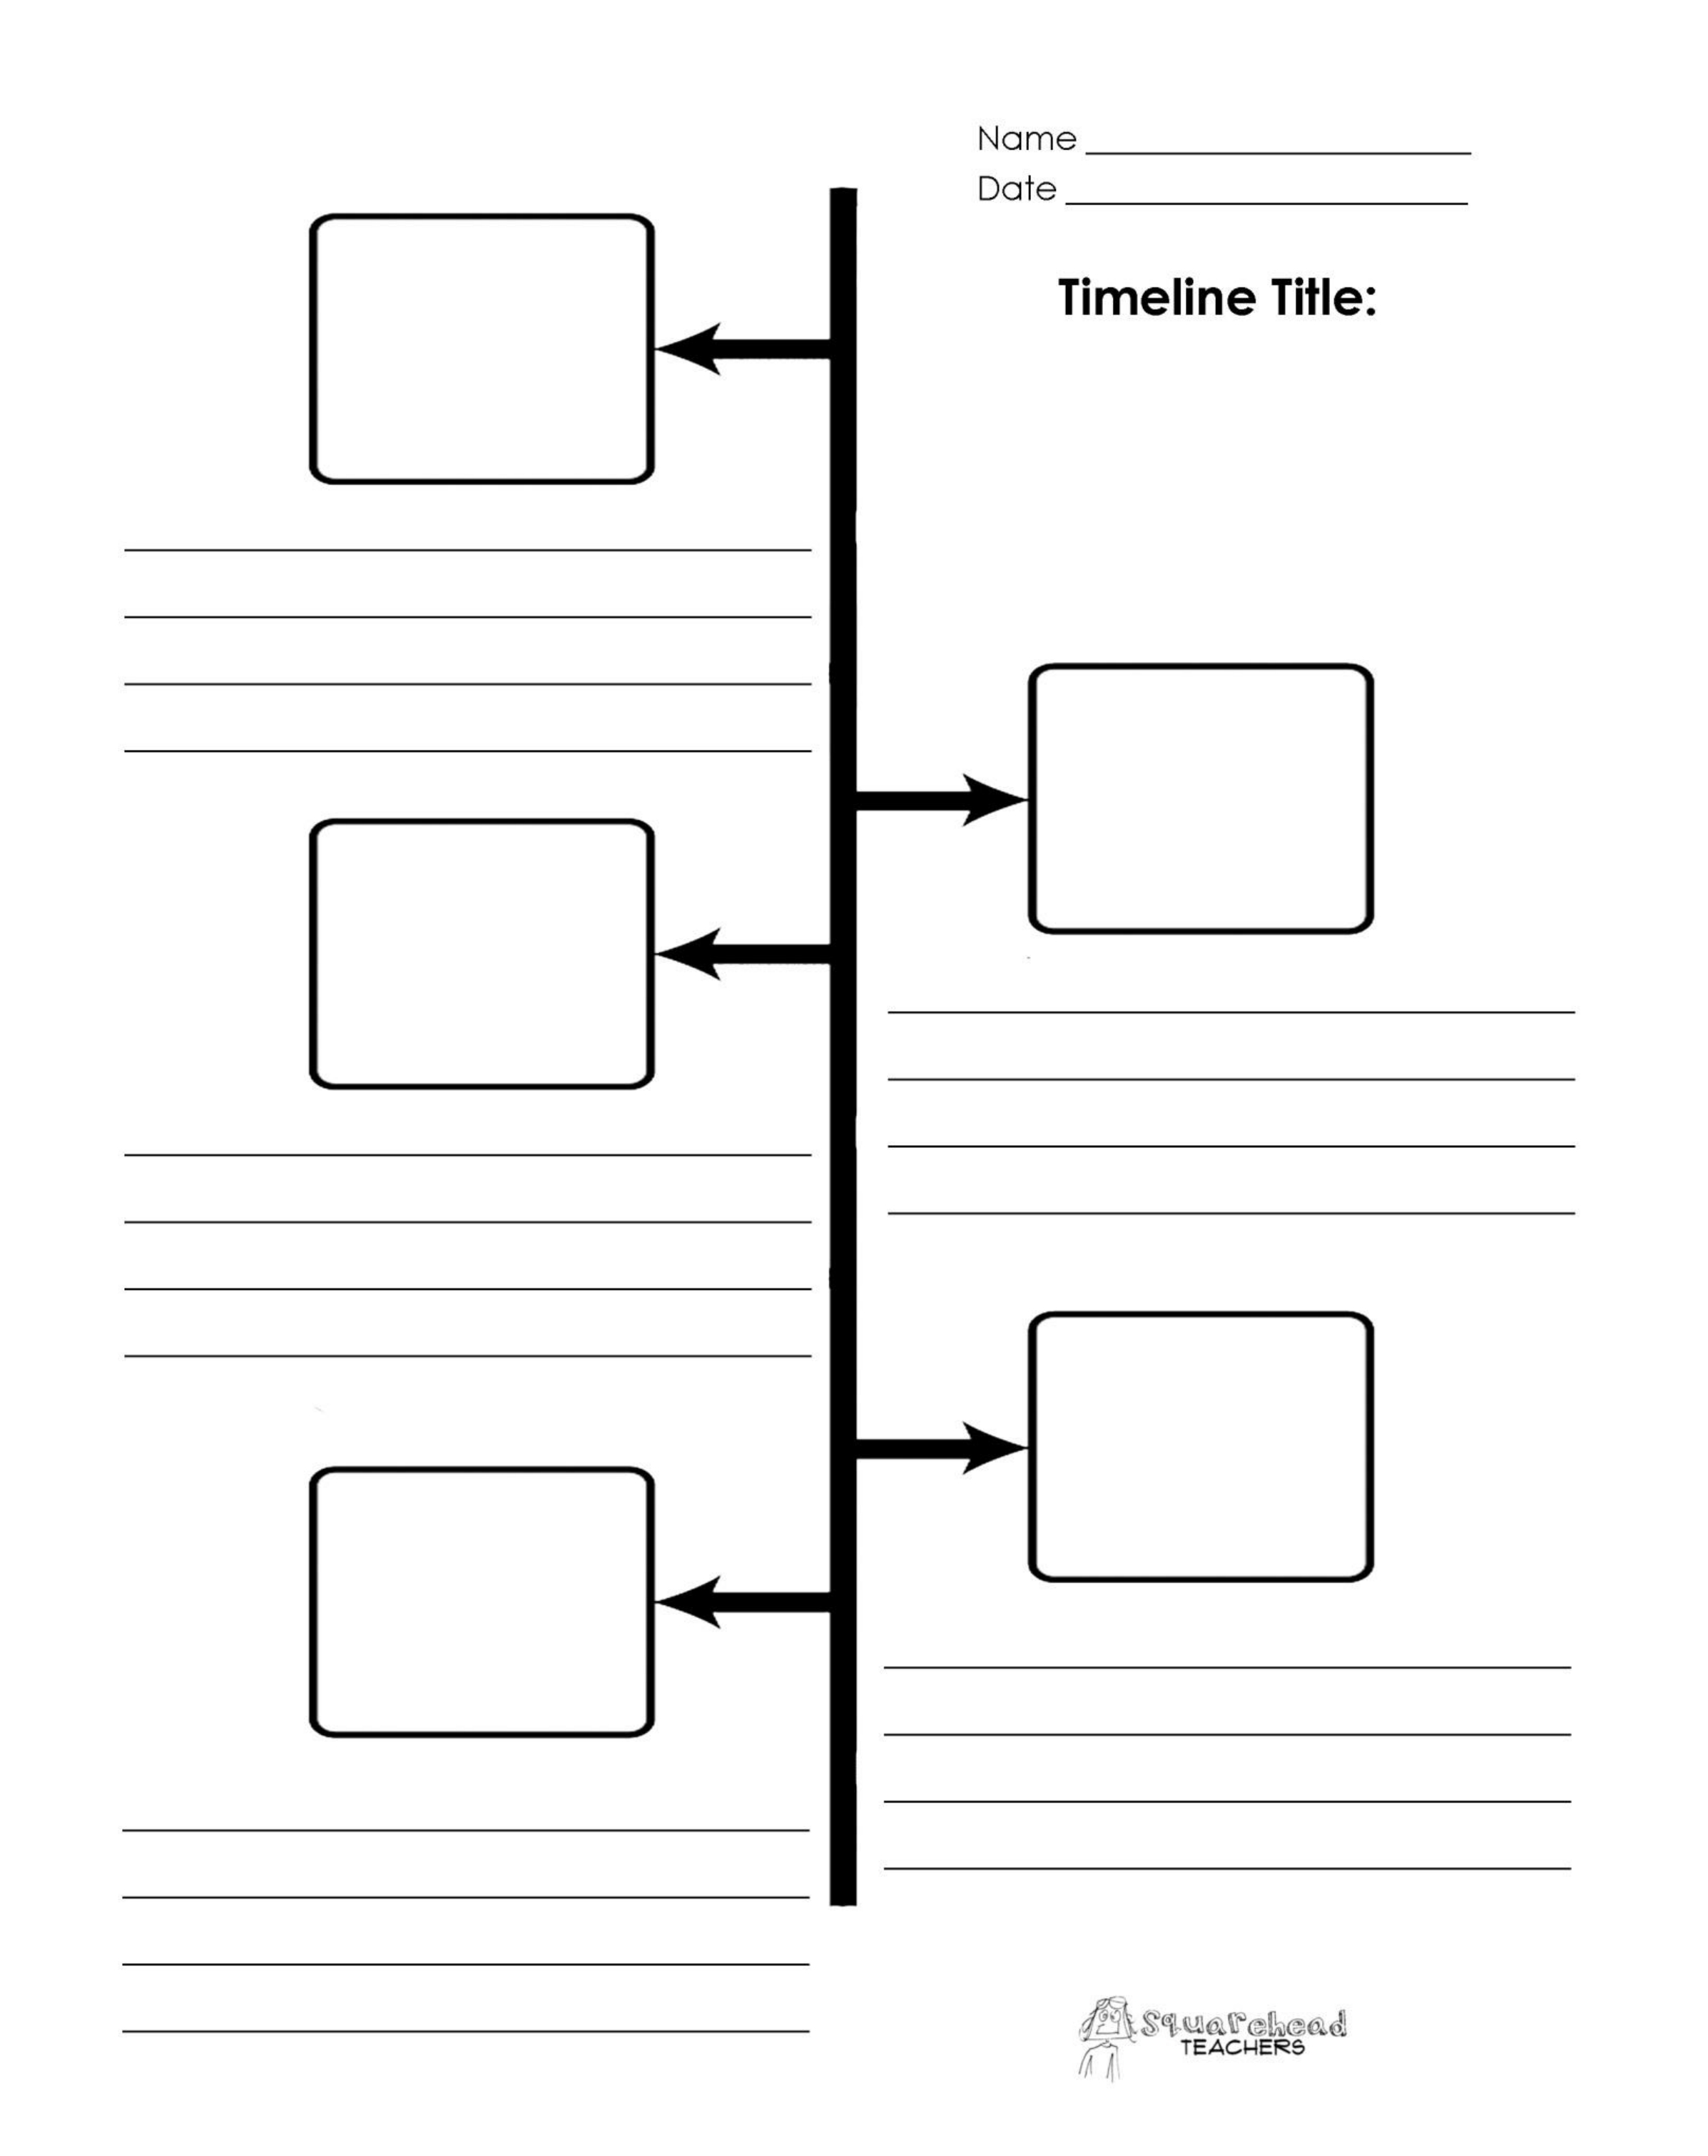 Blank Project Timeline Template Free Download - Free Blank Timeline Template Printable